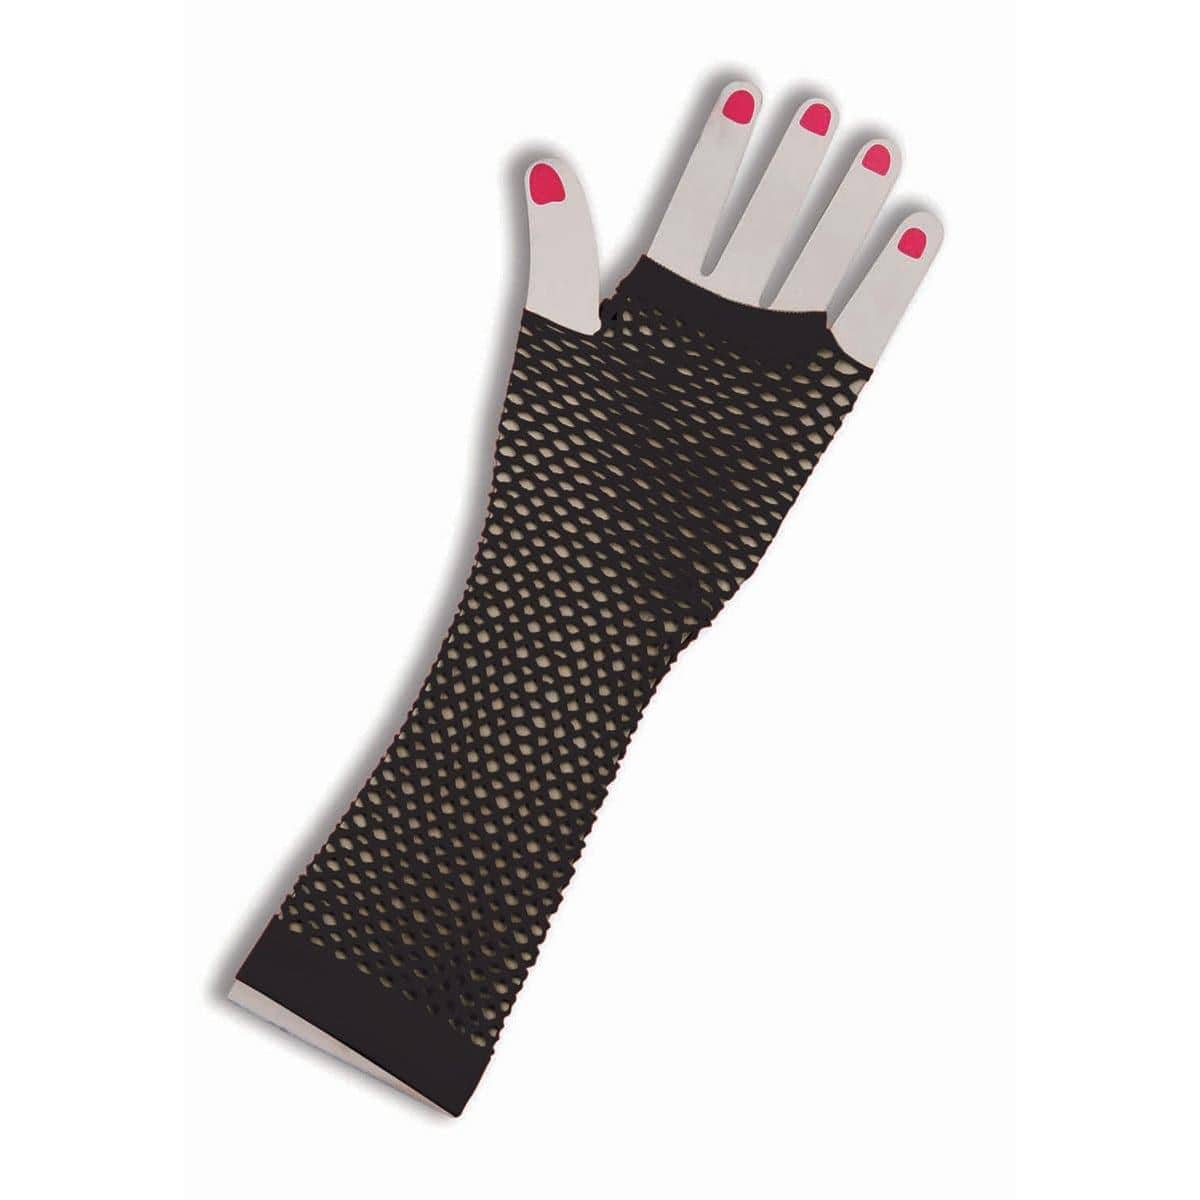 Buy Costume Accessories Black long fingerless fishnet gloves for adults sold at Party Expert